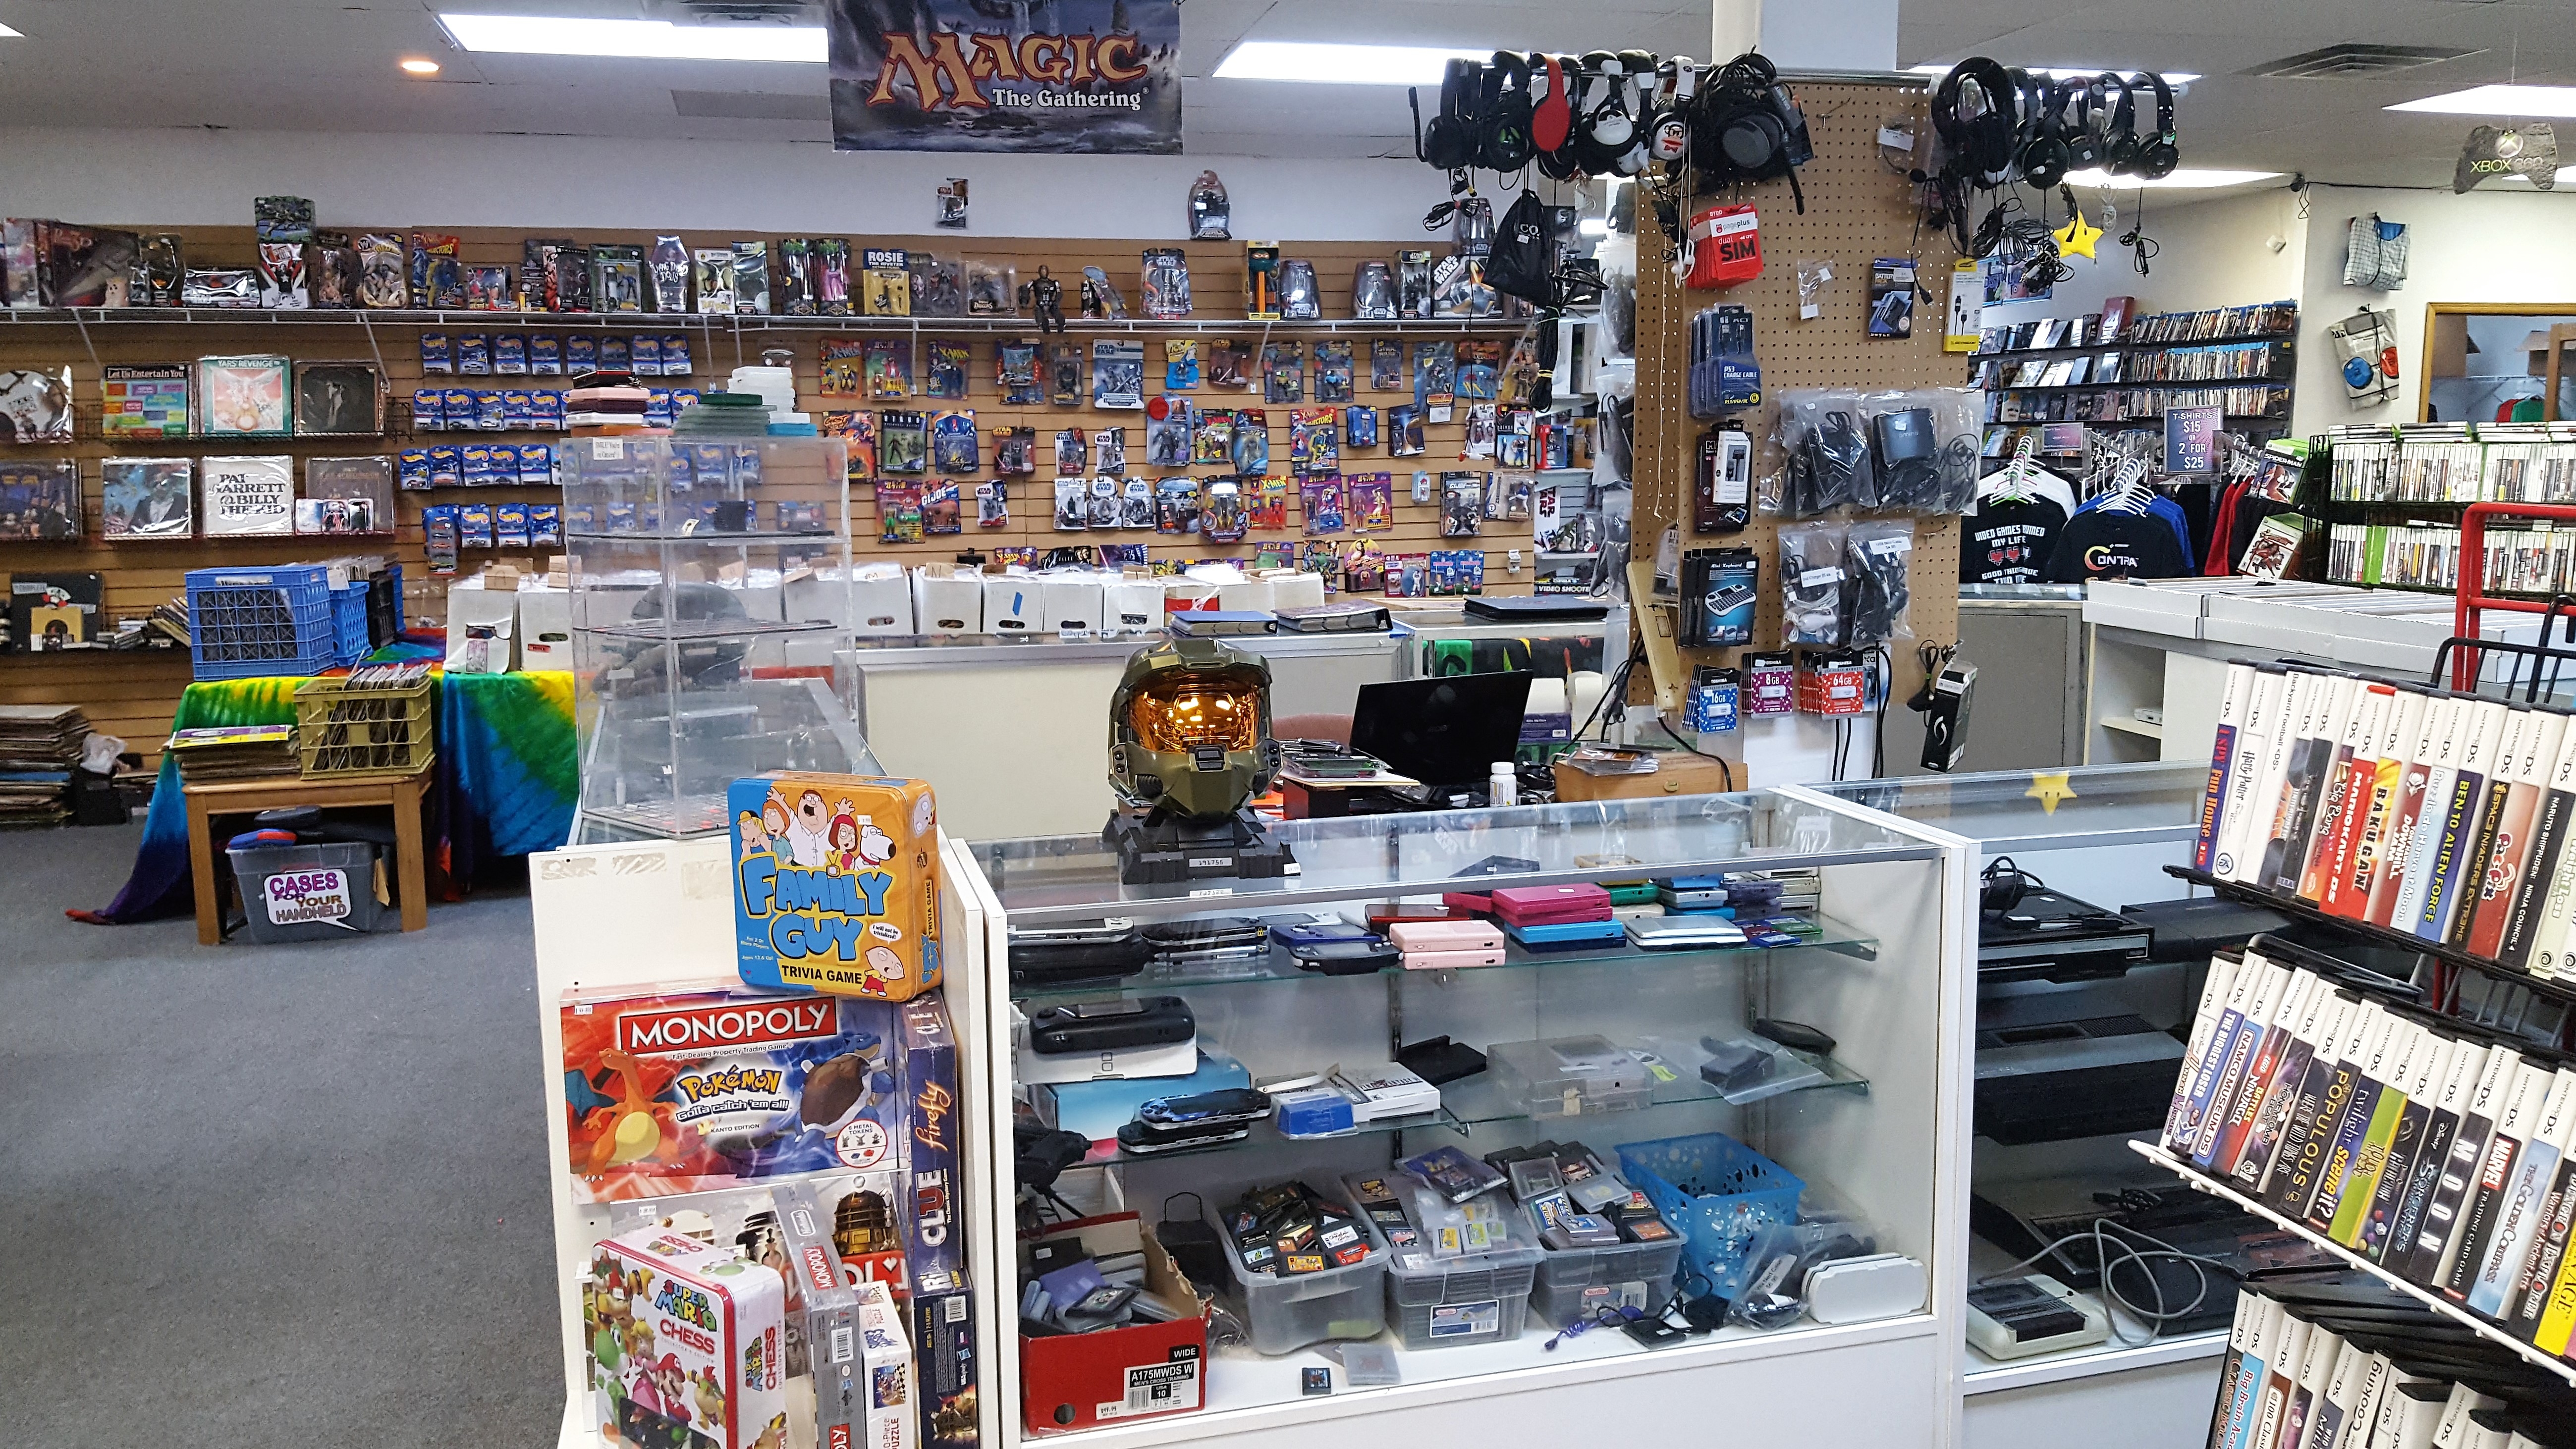 LGS Electronics Coupons near me in St. Cloud, MN 56304 ...